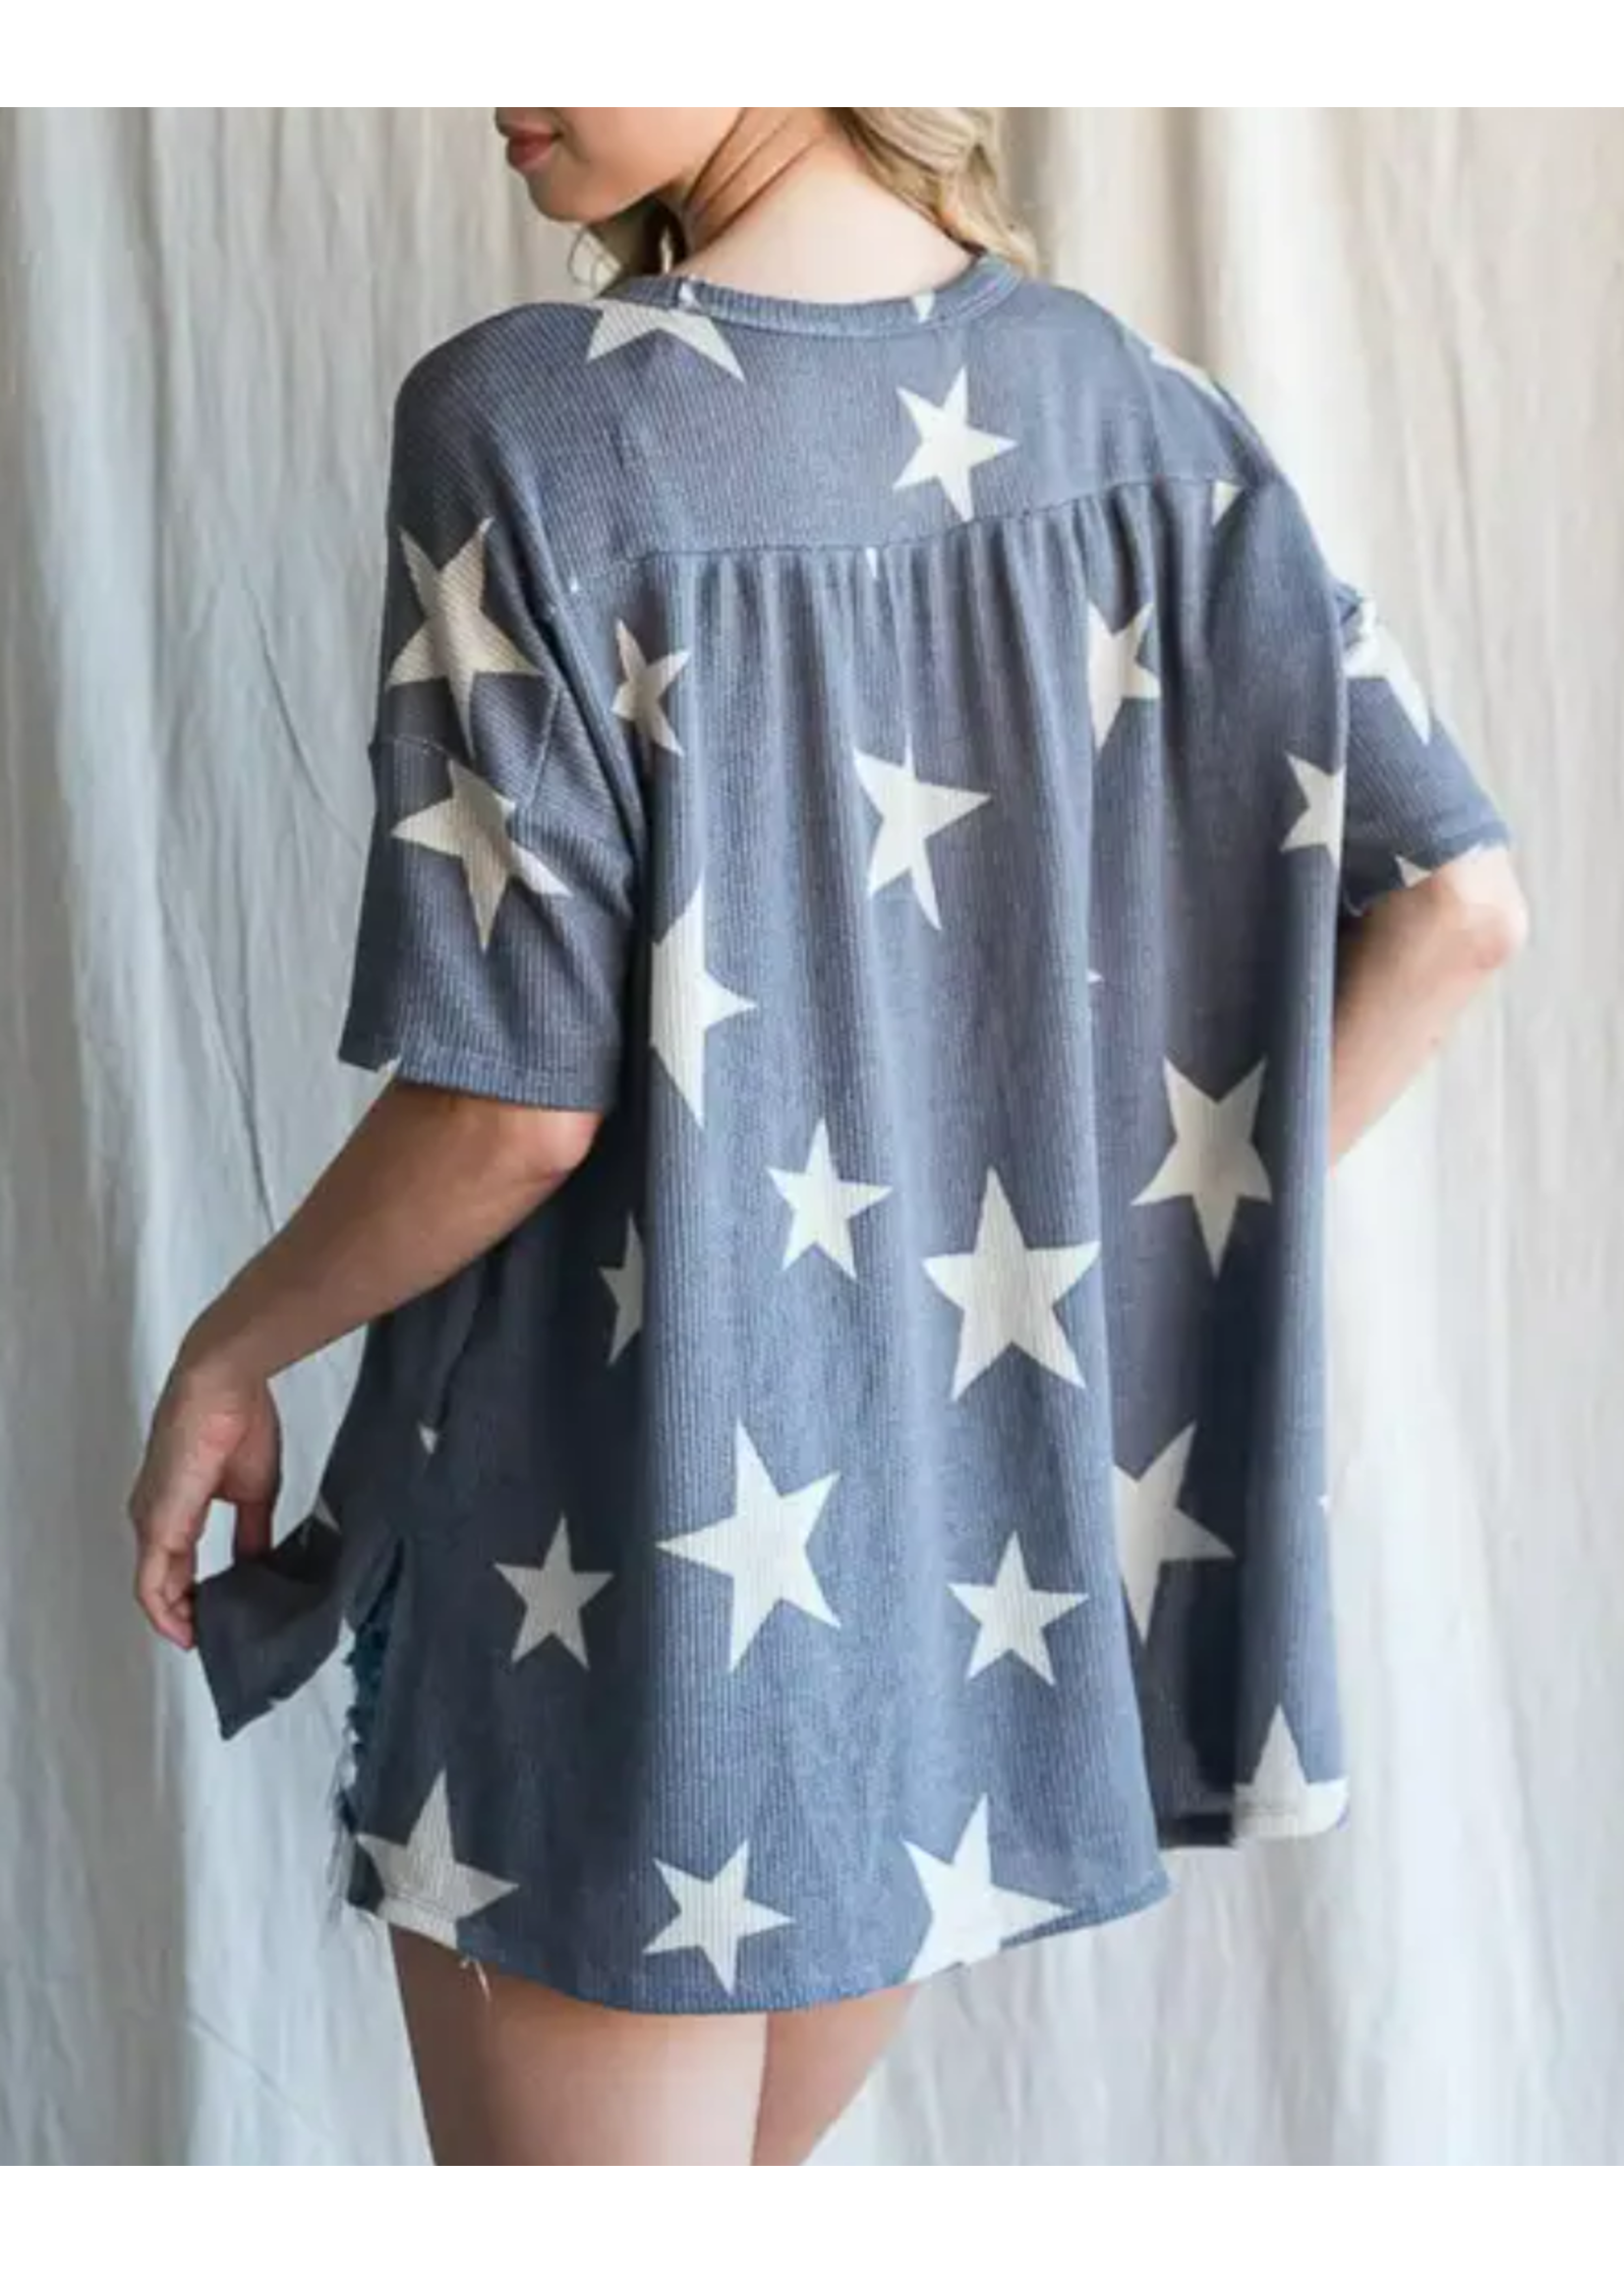 You Are A Shooting Star Stonewashed Star Top